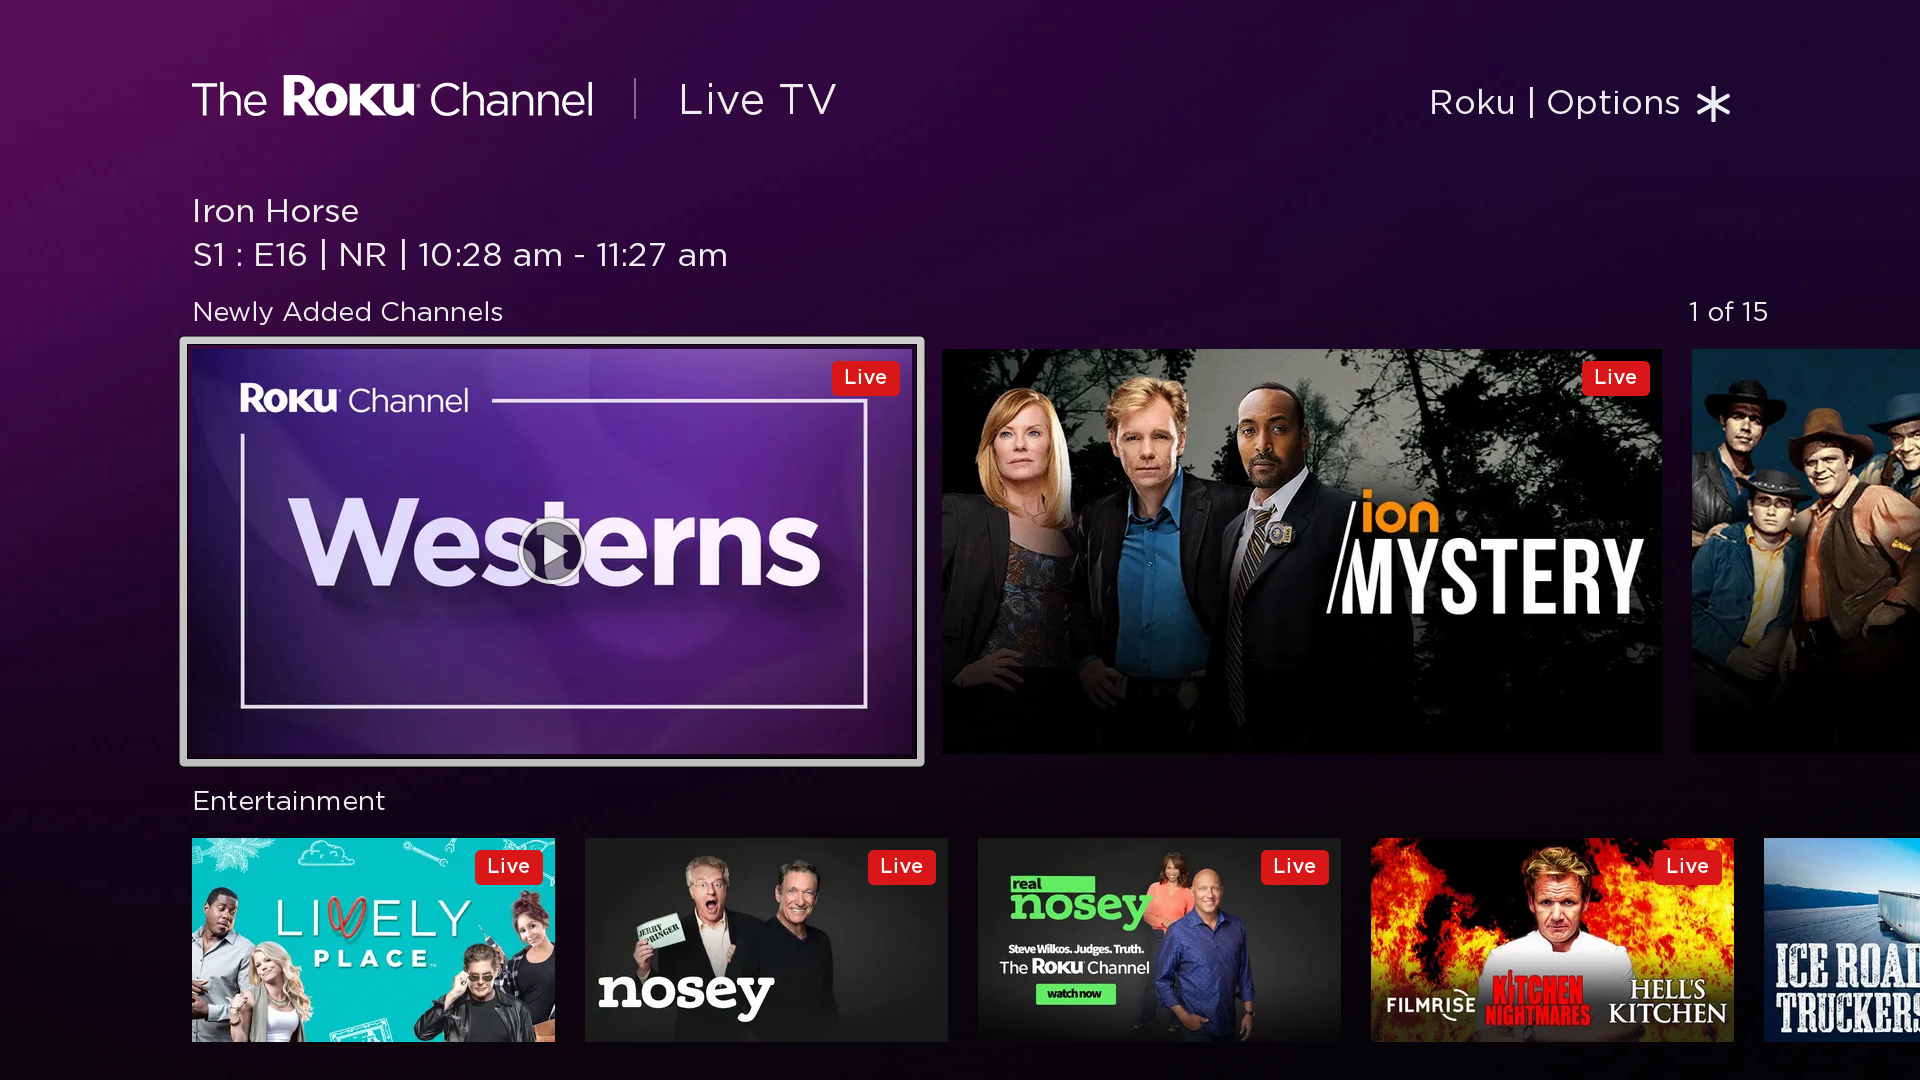 The Roku Channel live TV guide 